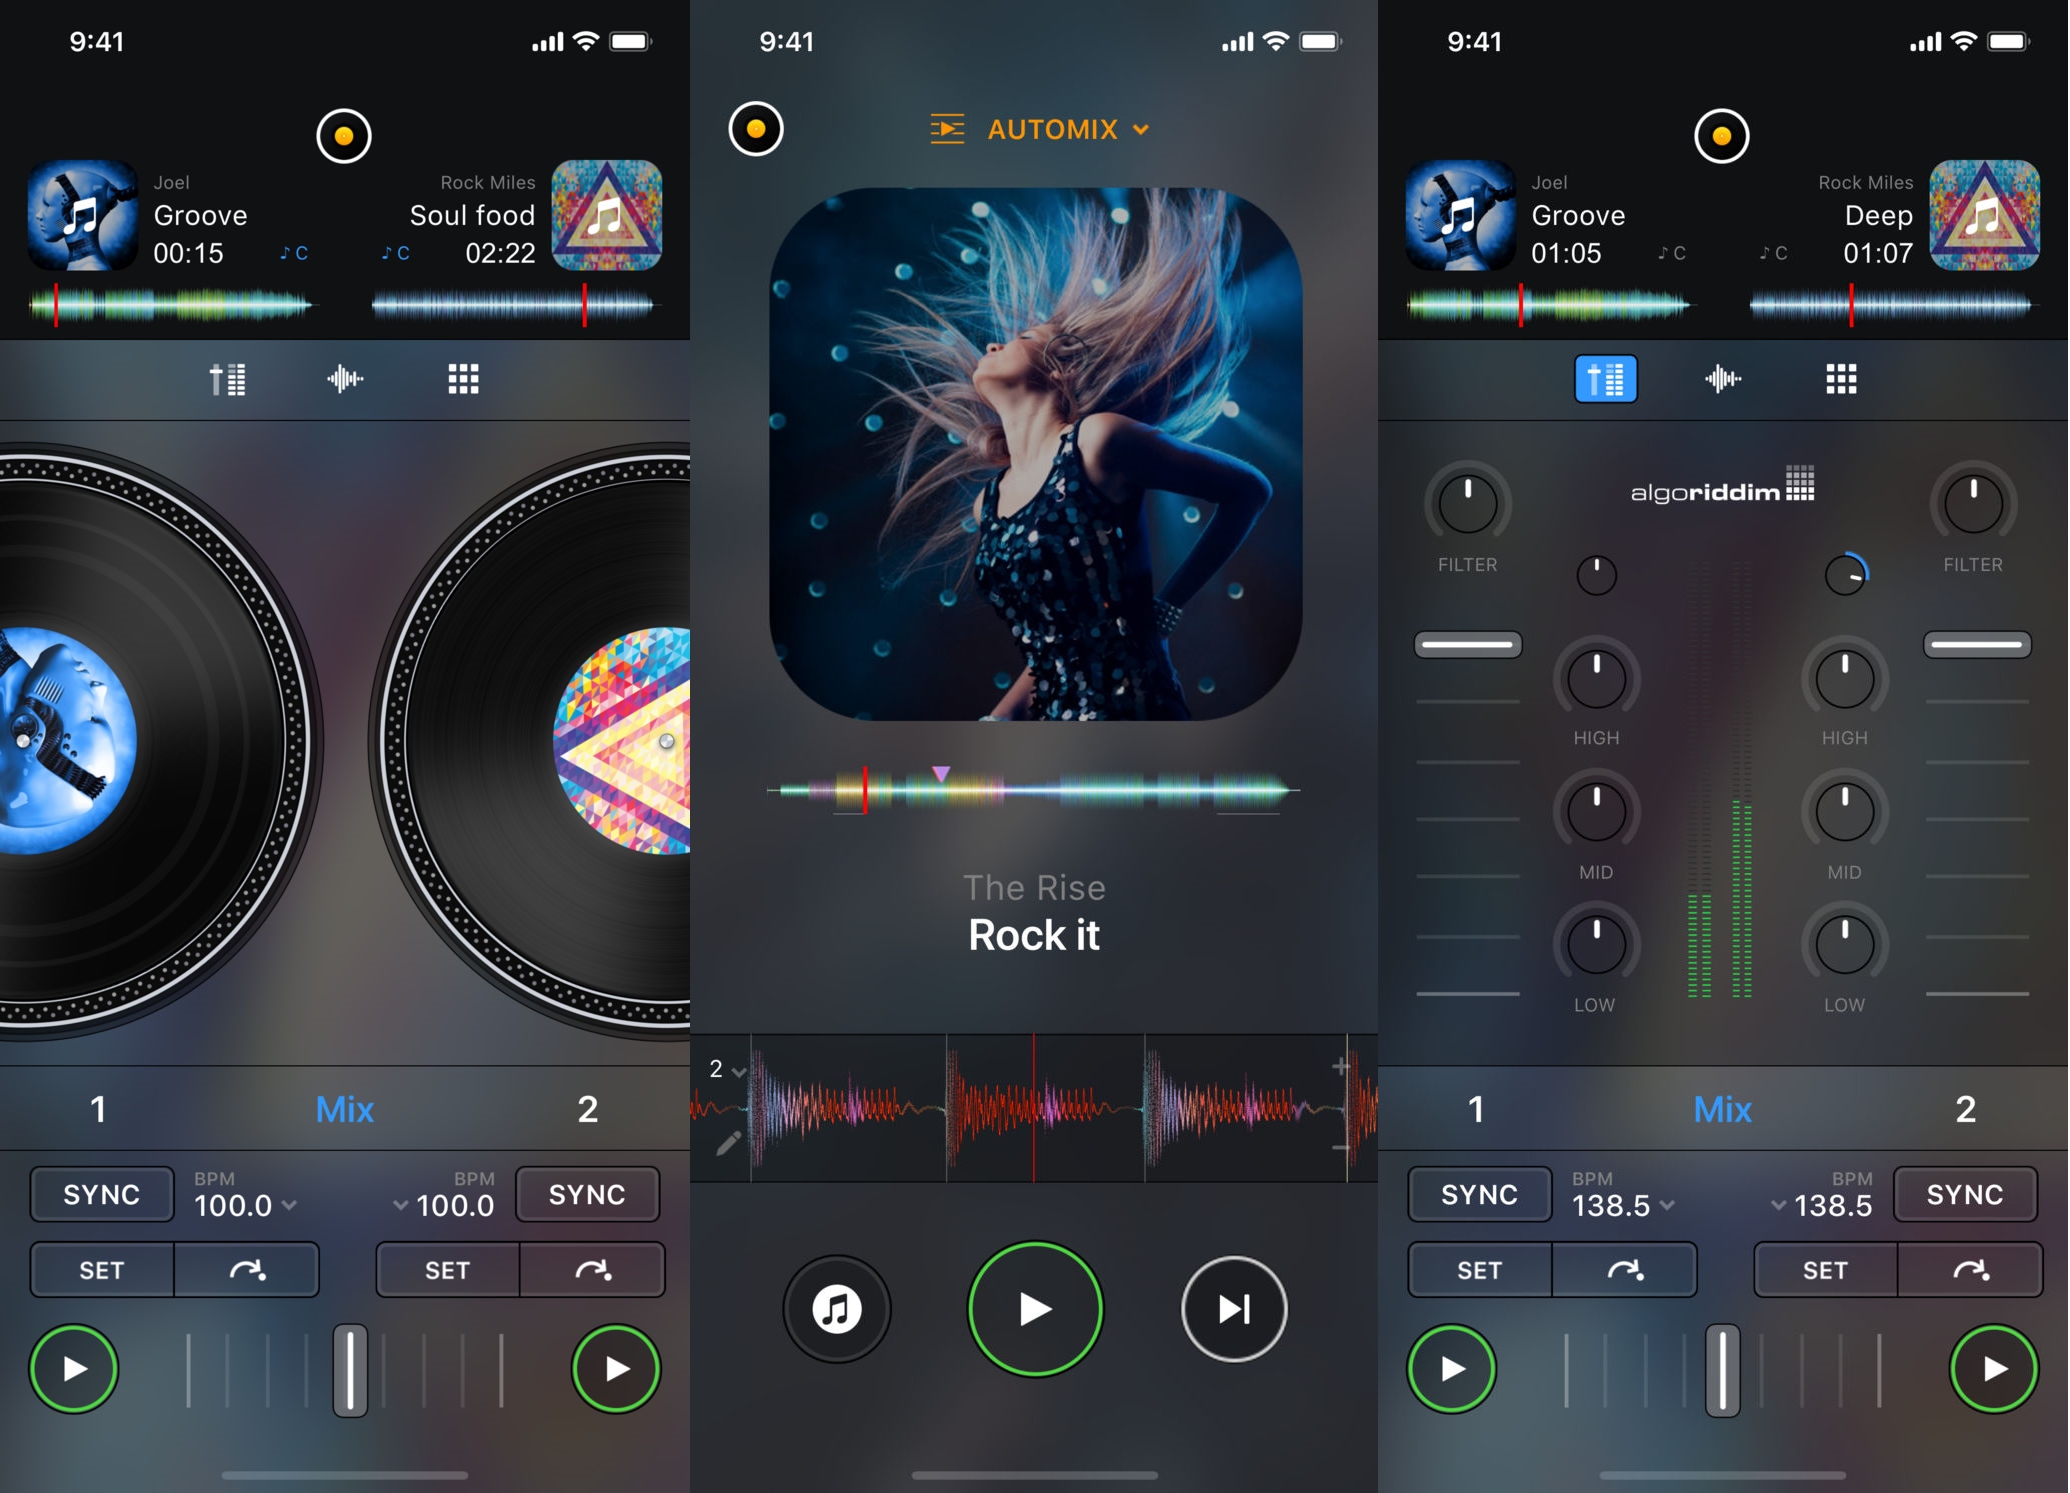 Everyone can DJ on iOS with djay’s new free app